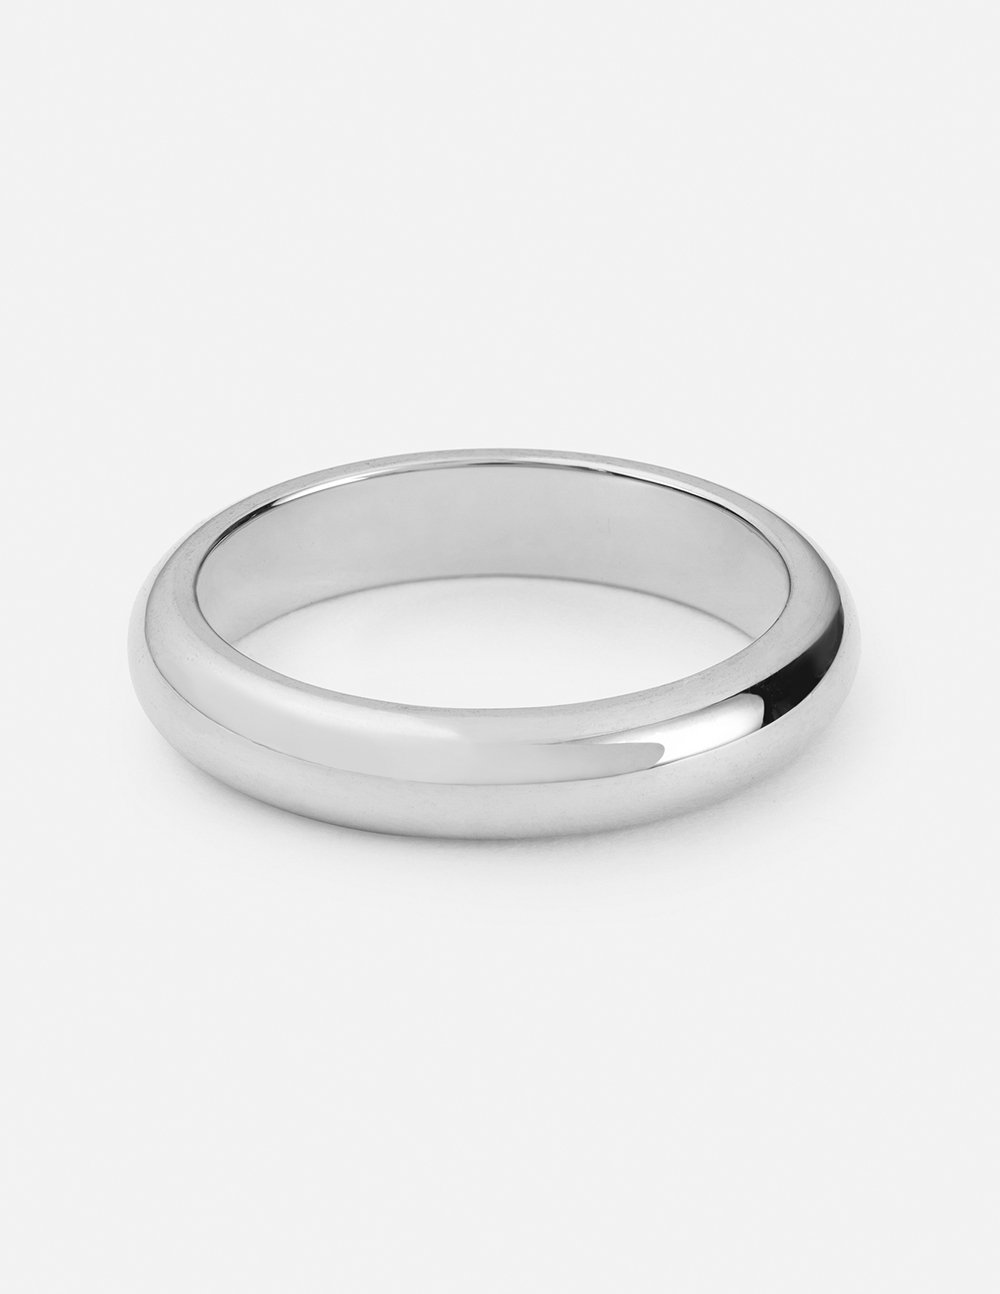 SEN ENTERPRISE Pure Silver Band Ring / Pure Silver Flat Ring / Plain Silver  Band Ring / Original Silver Band Ring / Silver Flat Ring Silver Sterling  Silver Plated Ring Price in